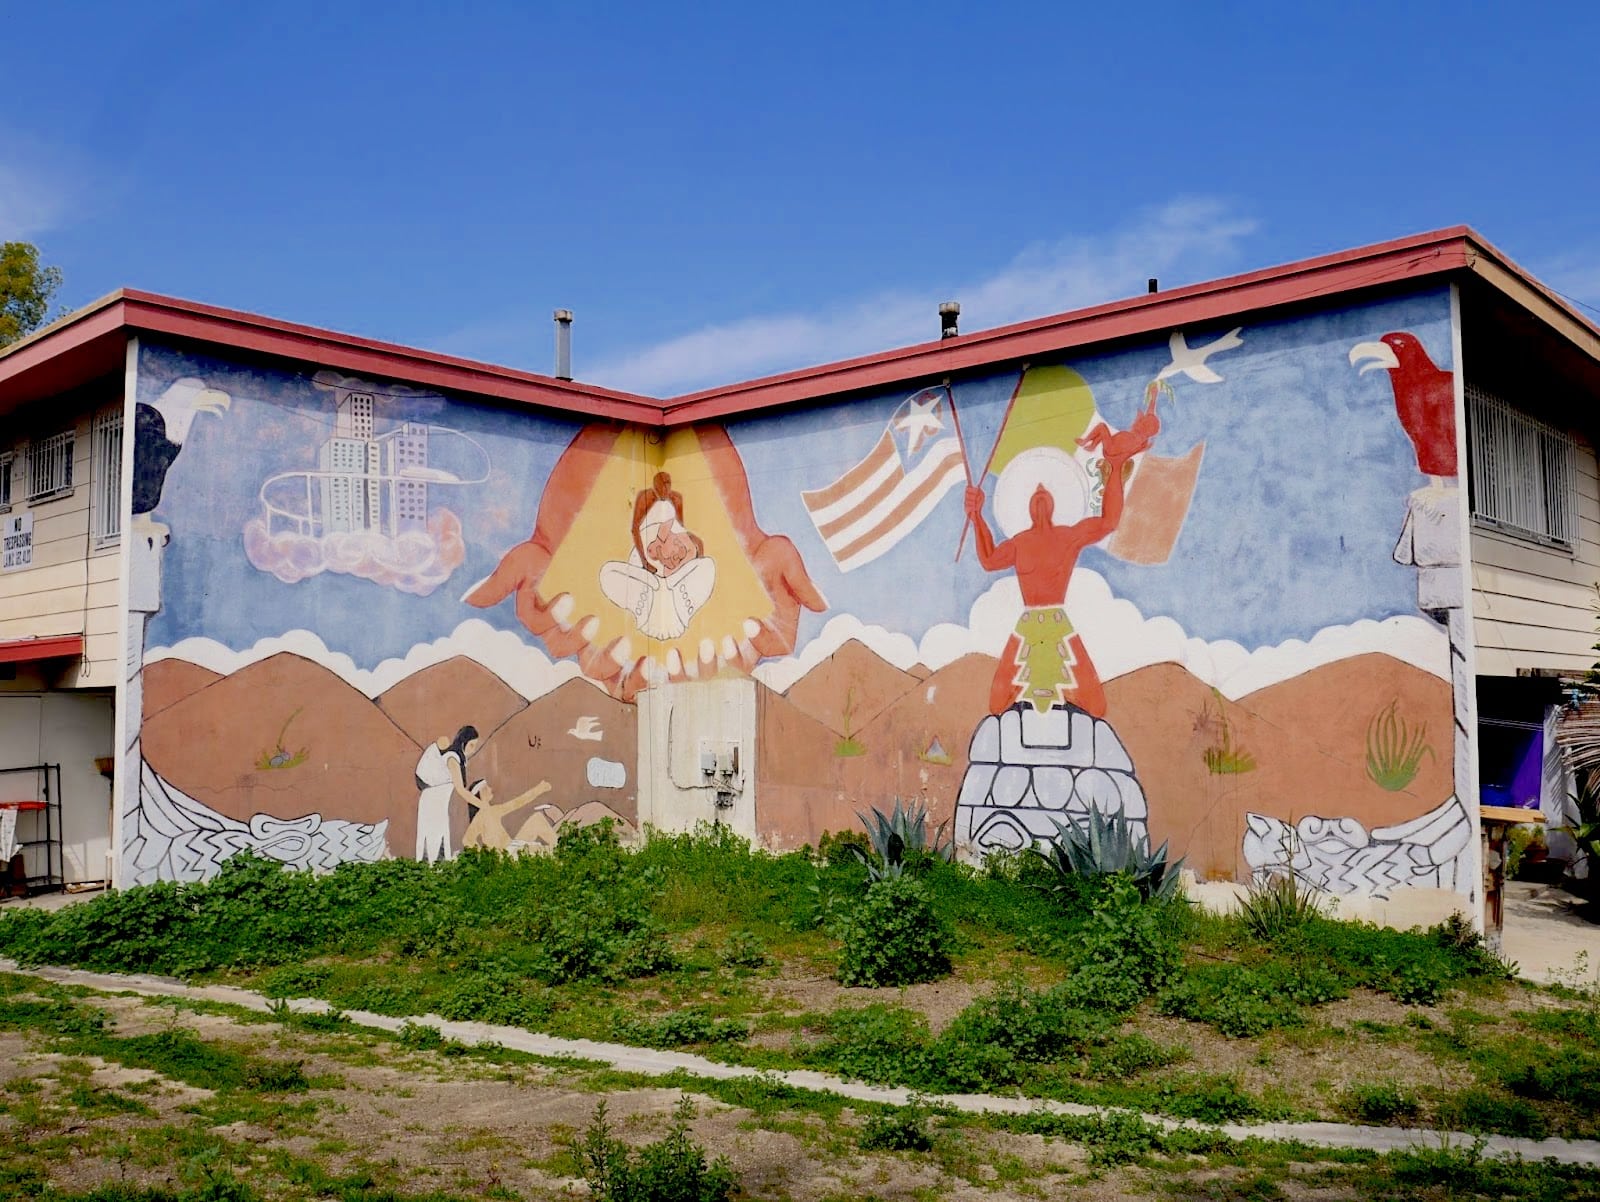 A mural is painted across two walls showing a man holding Mexican and American flags